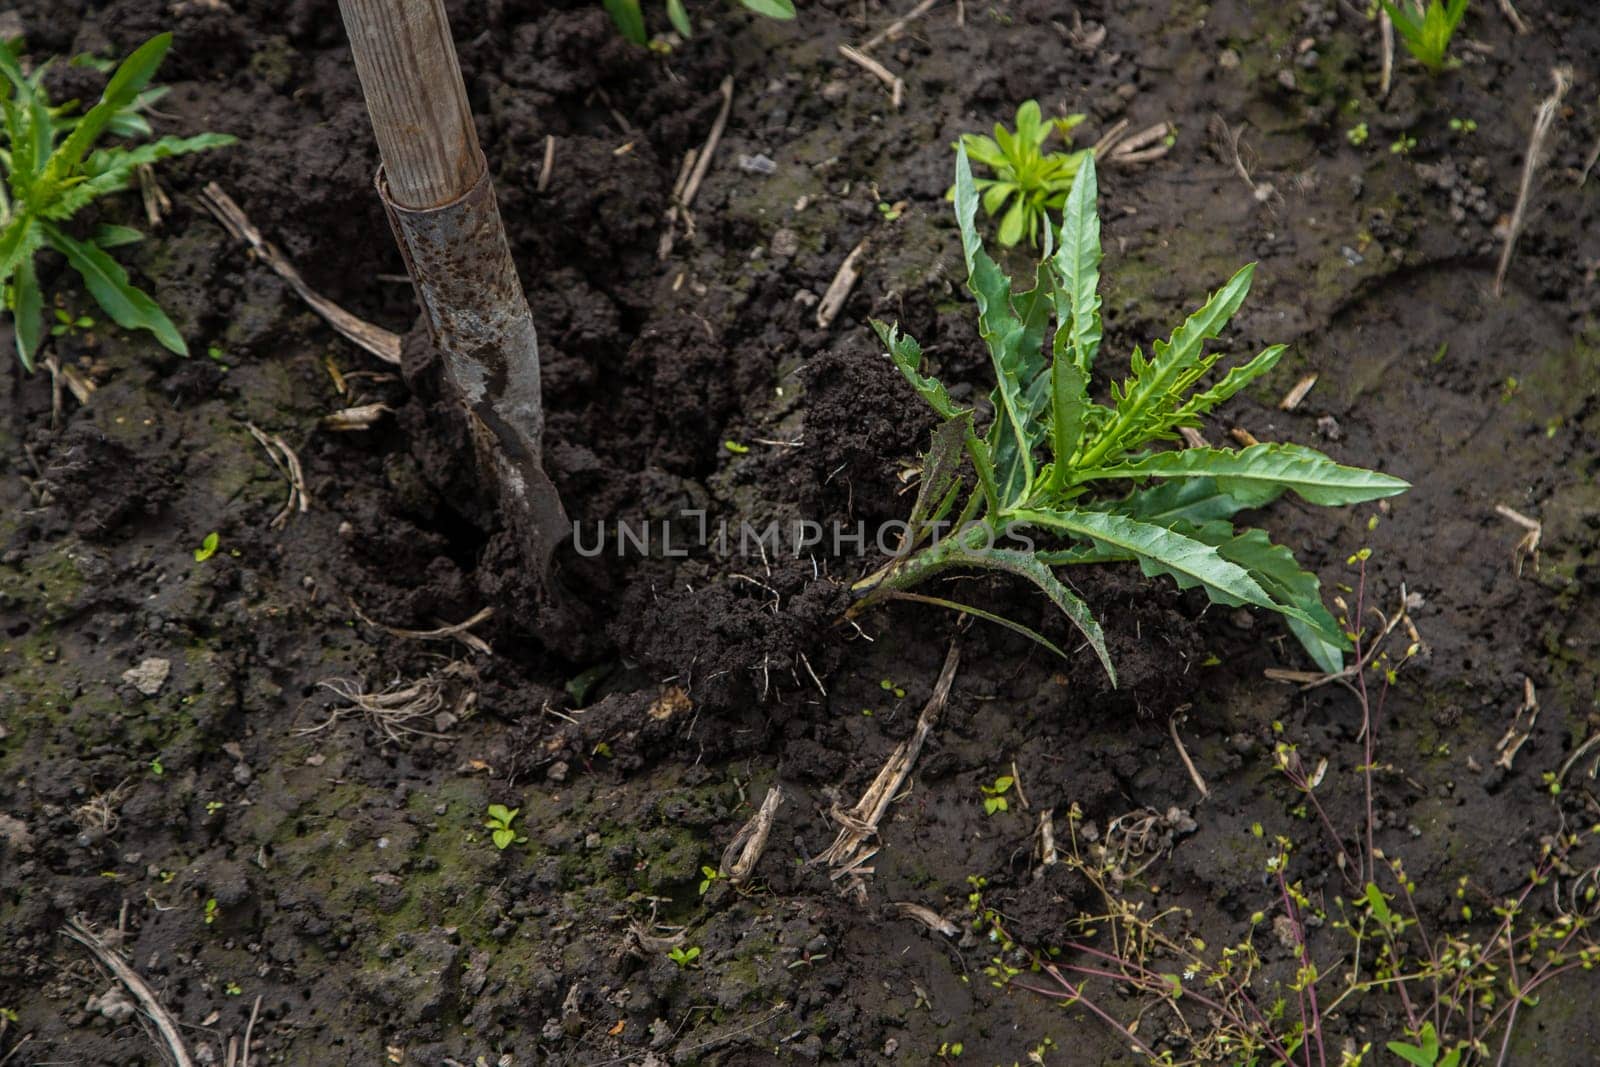 Digging up the weed sow thistle in the garden. Selective focus. Nature.